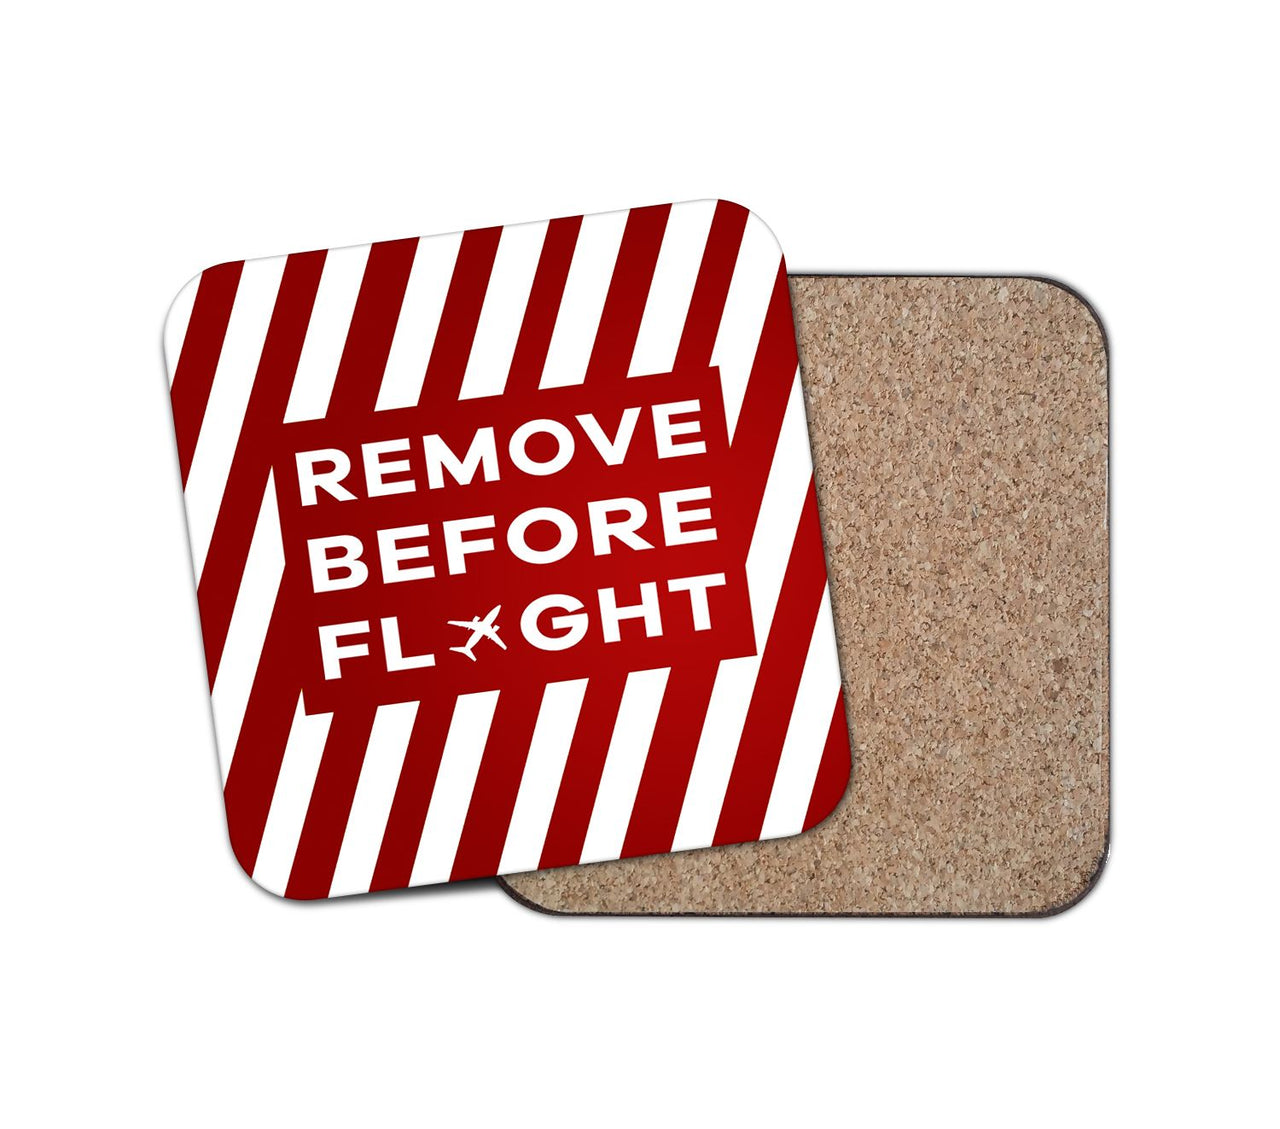 Special Edition Remove Before Flight Designed Coasters